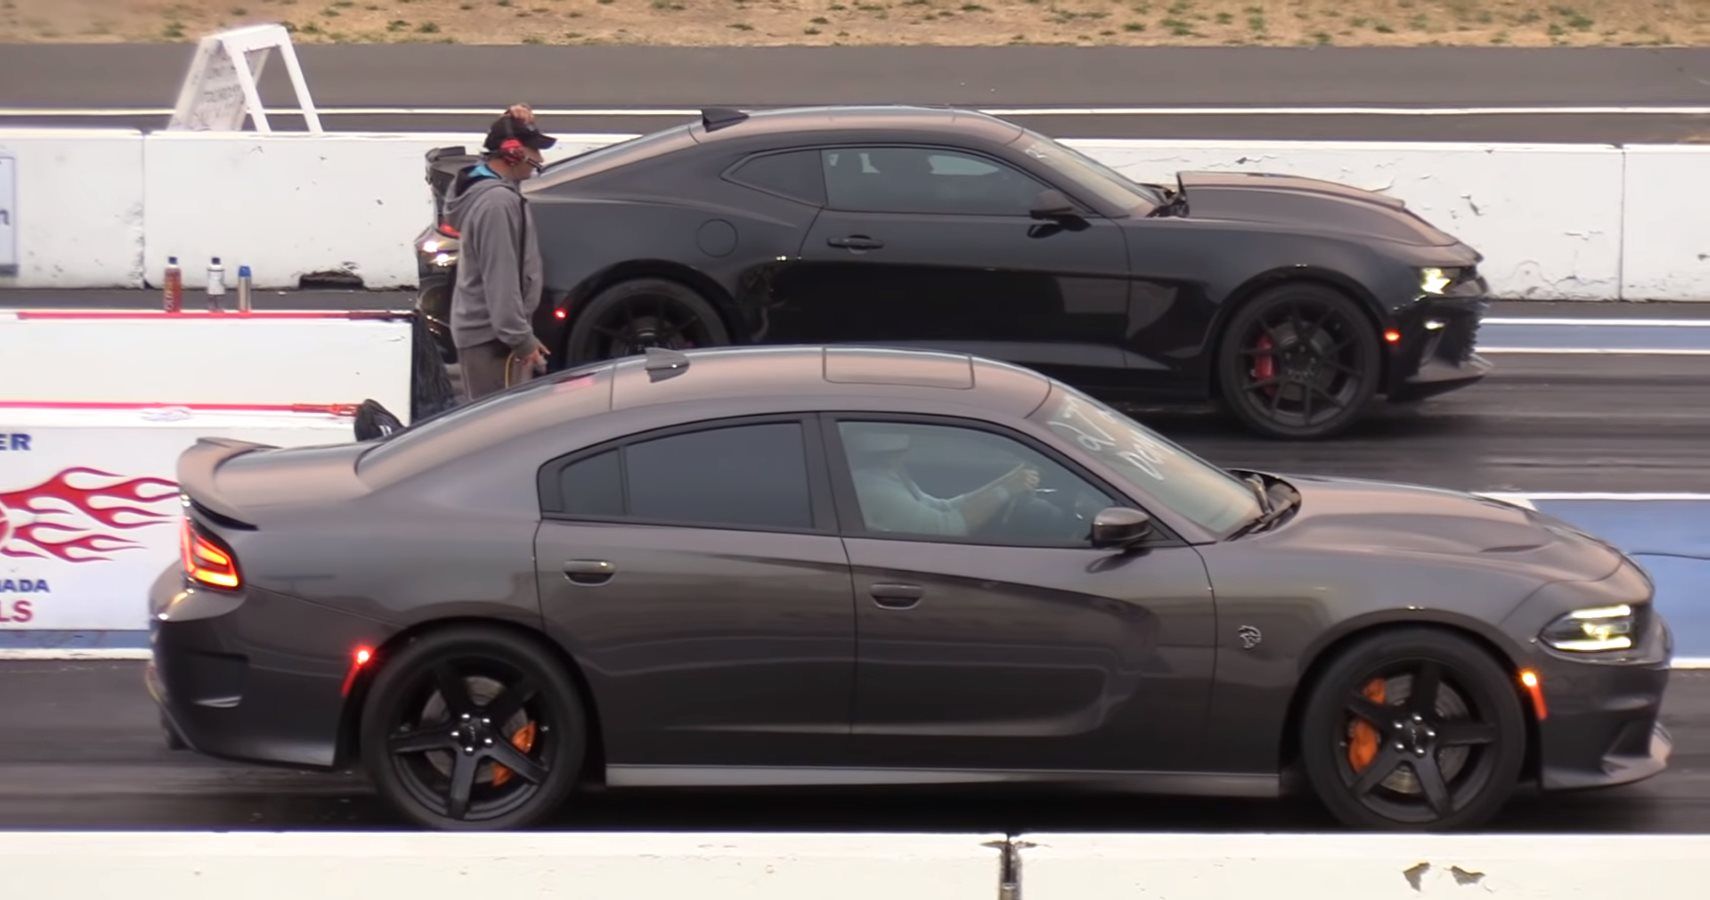 A Tuned Chevy Camaro SS Takes On Dodge Charger Hellcat In Drag Race Action